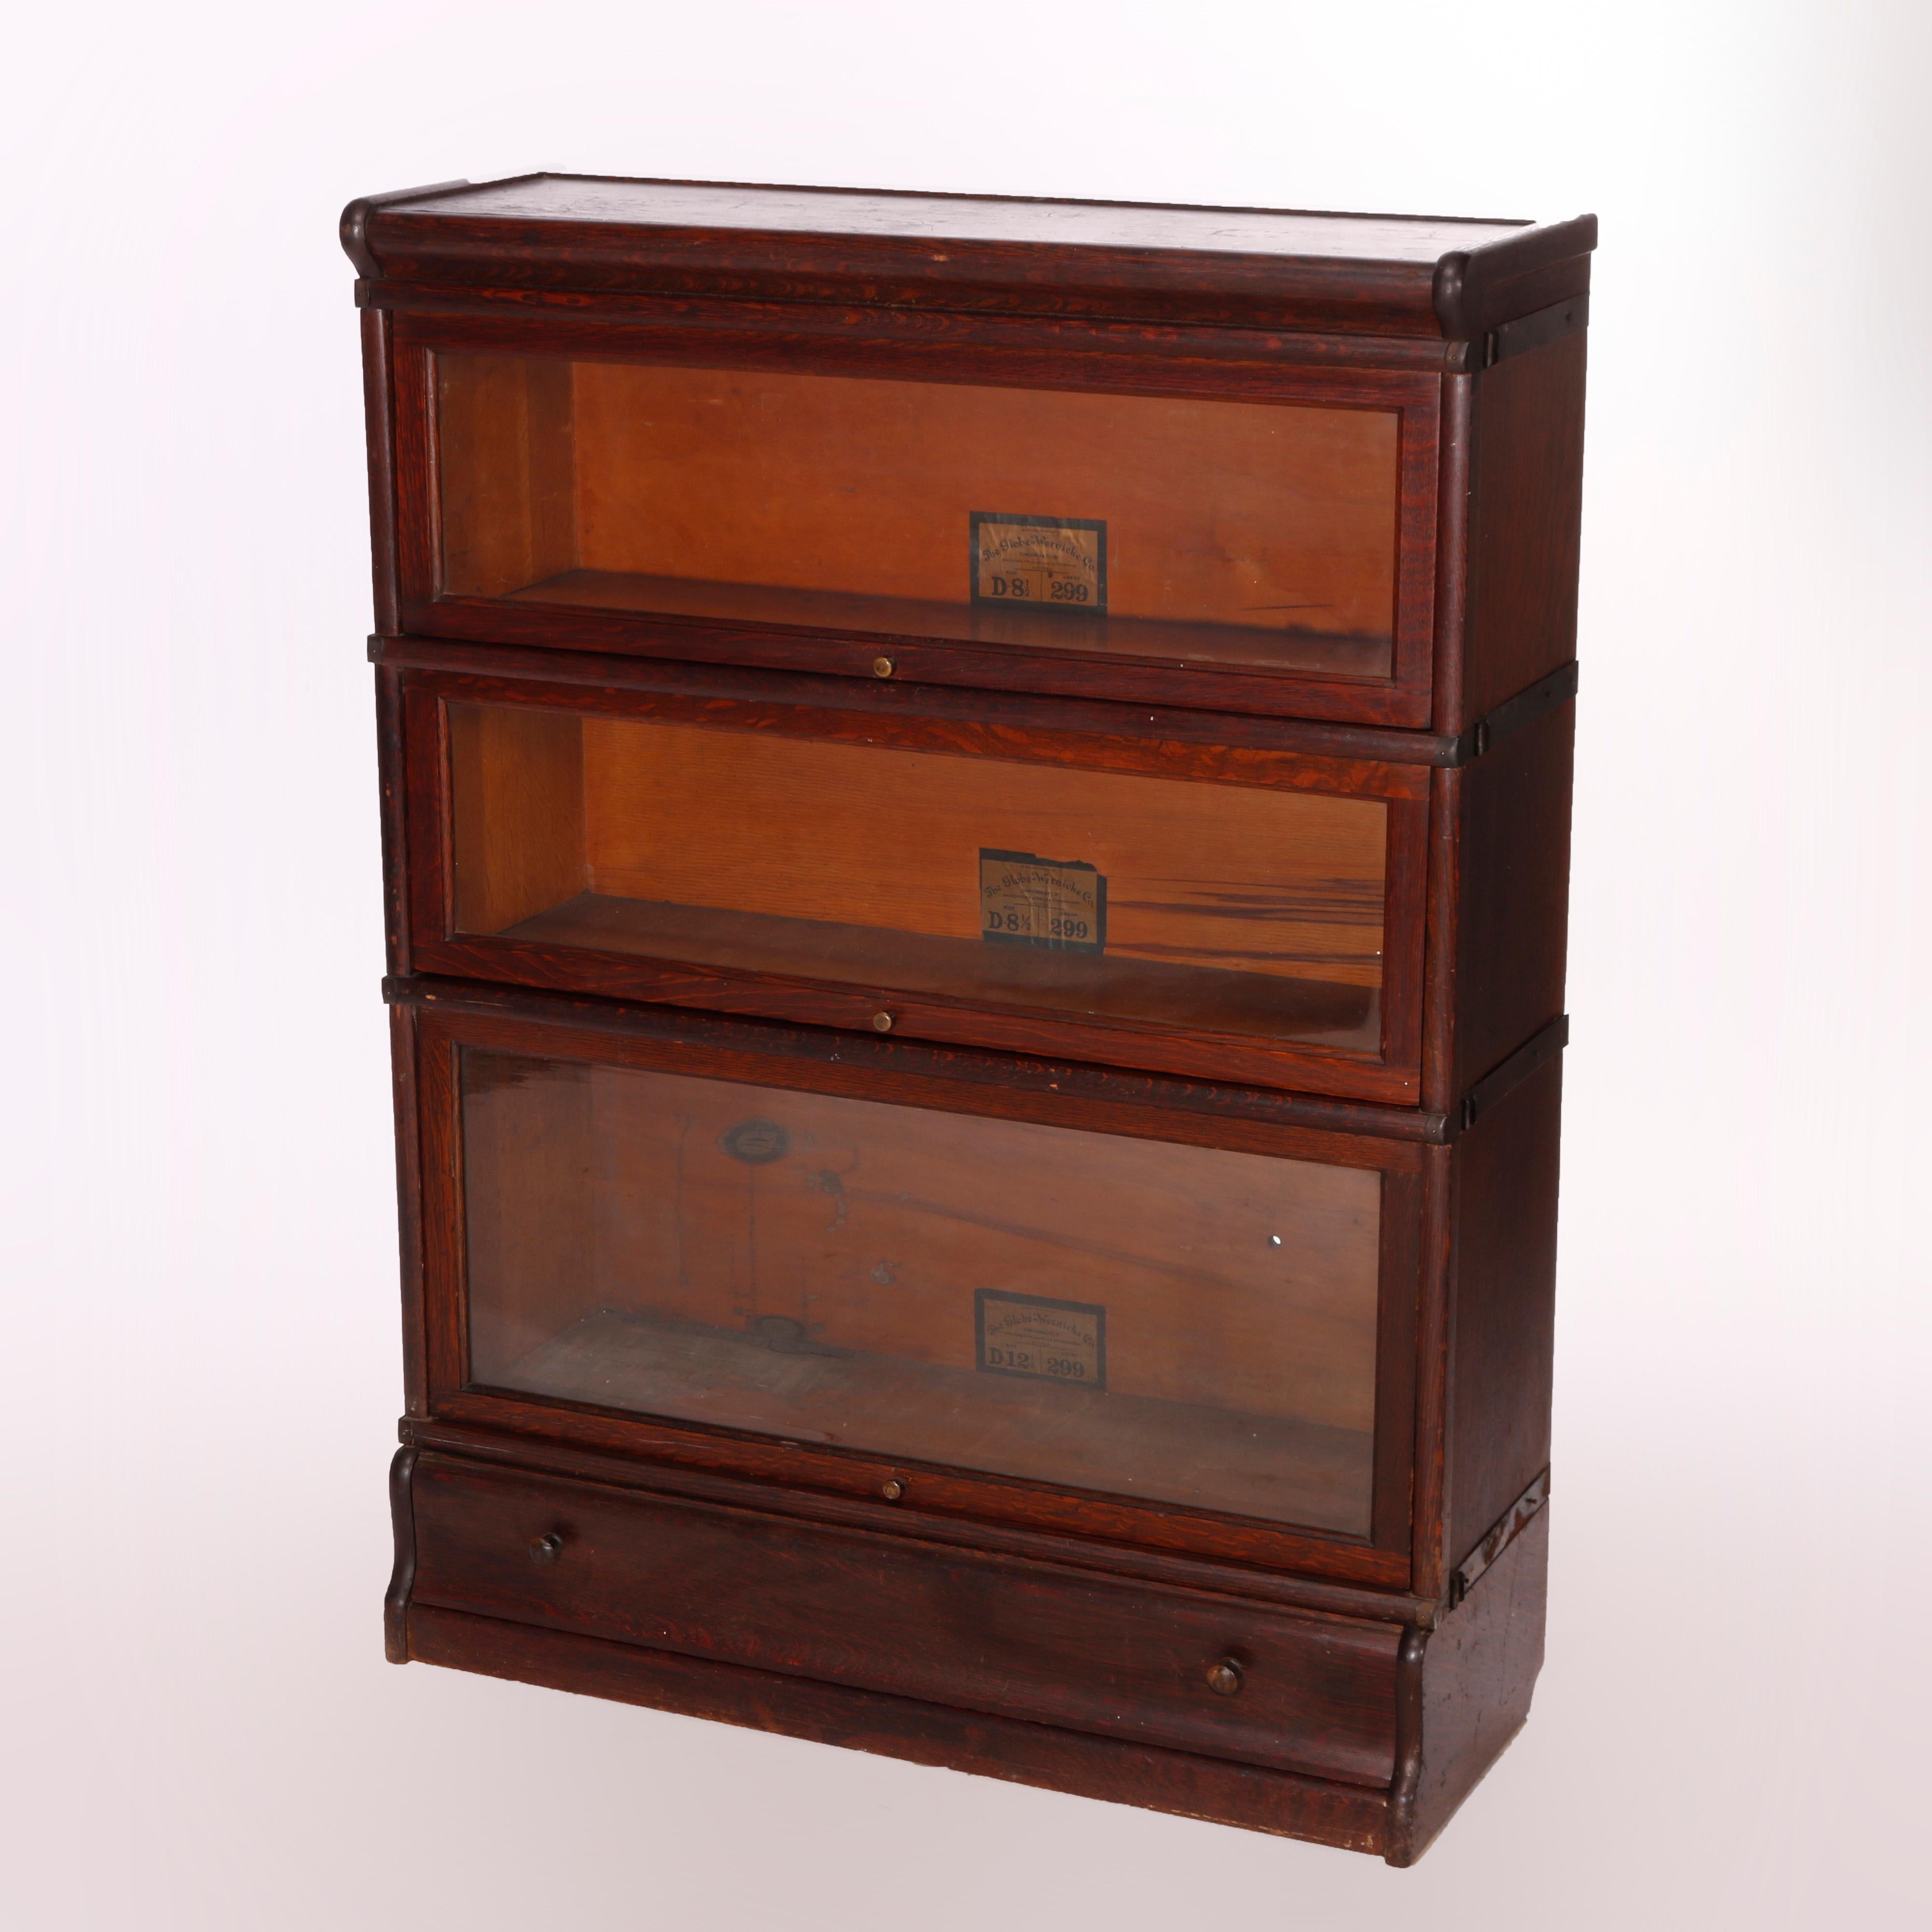 An antique Arts and Crafts Barrister bookcase by Globe Wernicke offers quarter sawn oak construction with three stacks, each having pull out glass doors, raised on ogee base having single drawer, maker labels as photographed, c1910

Measures -